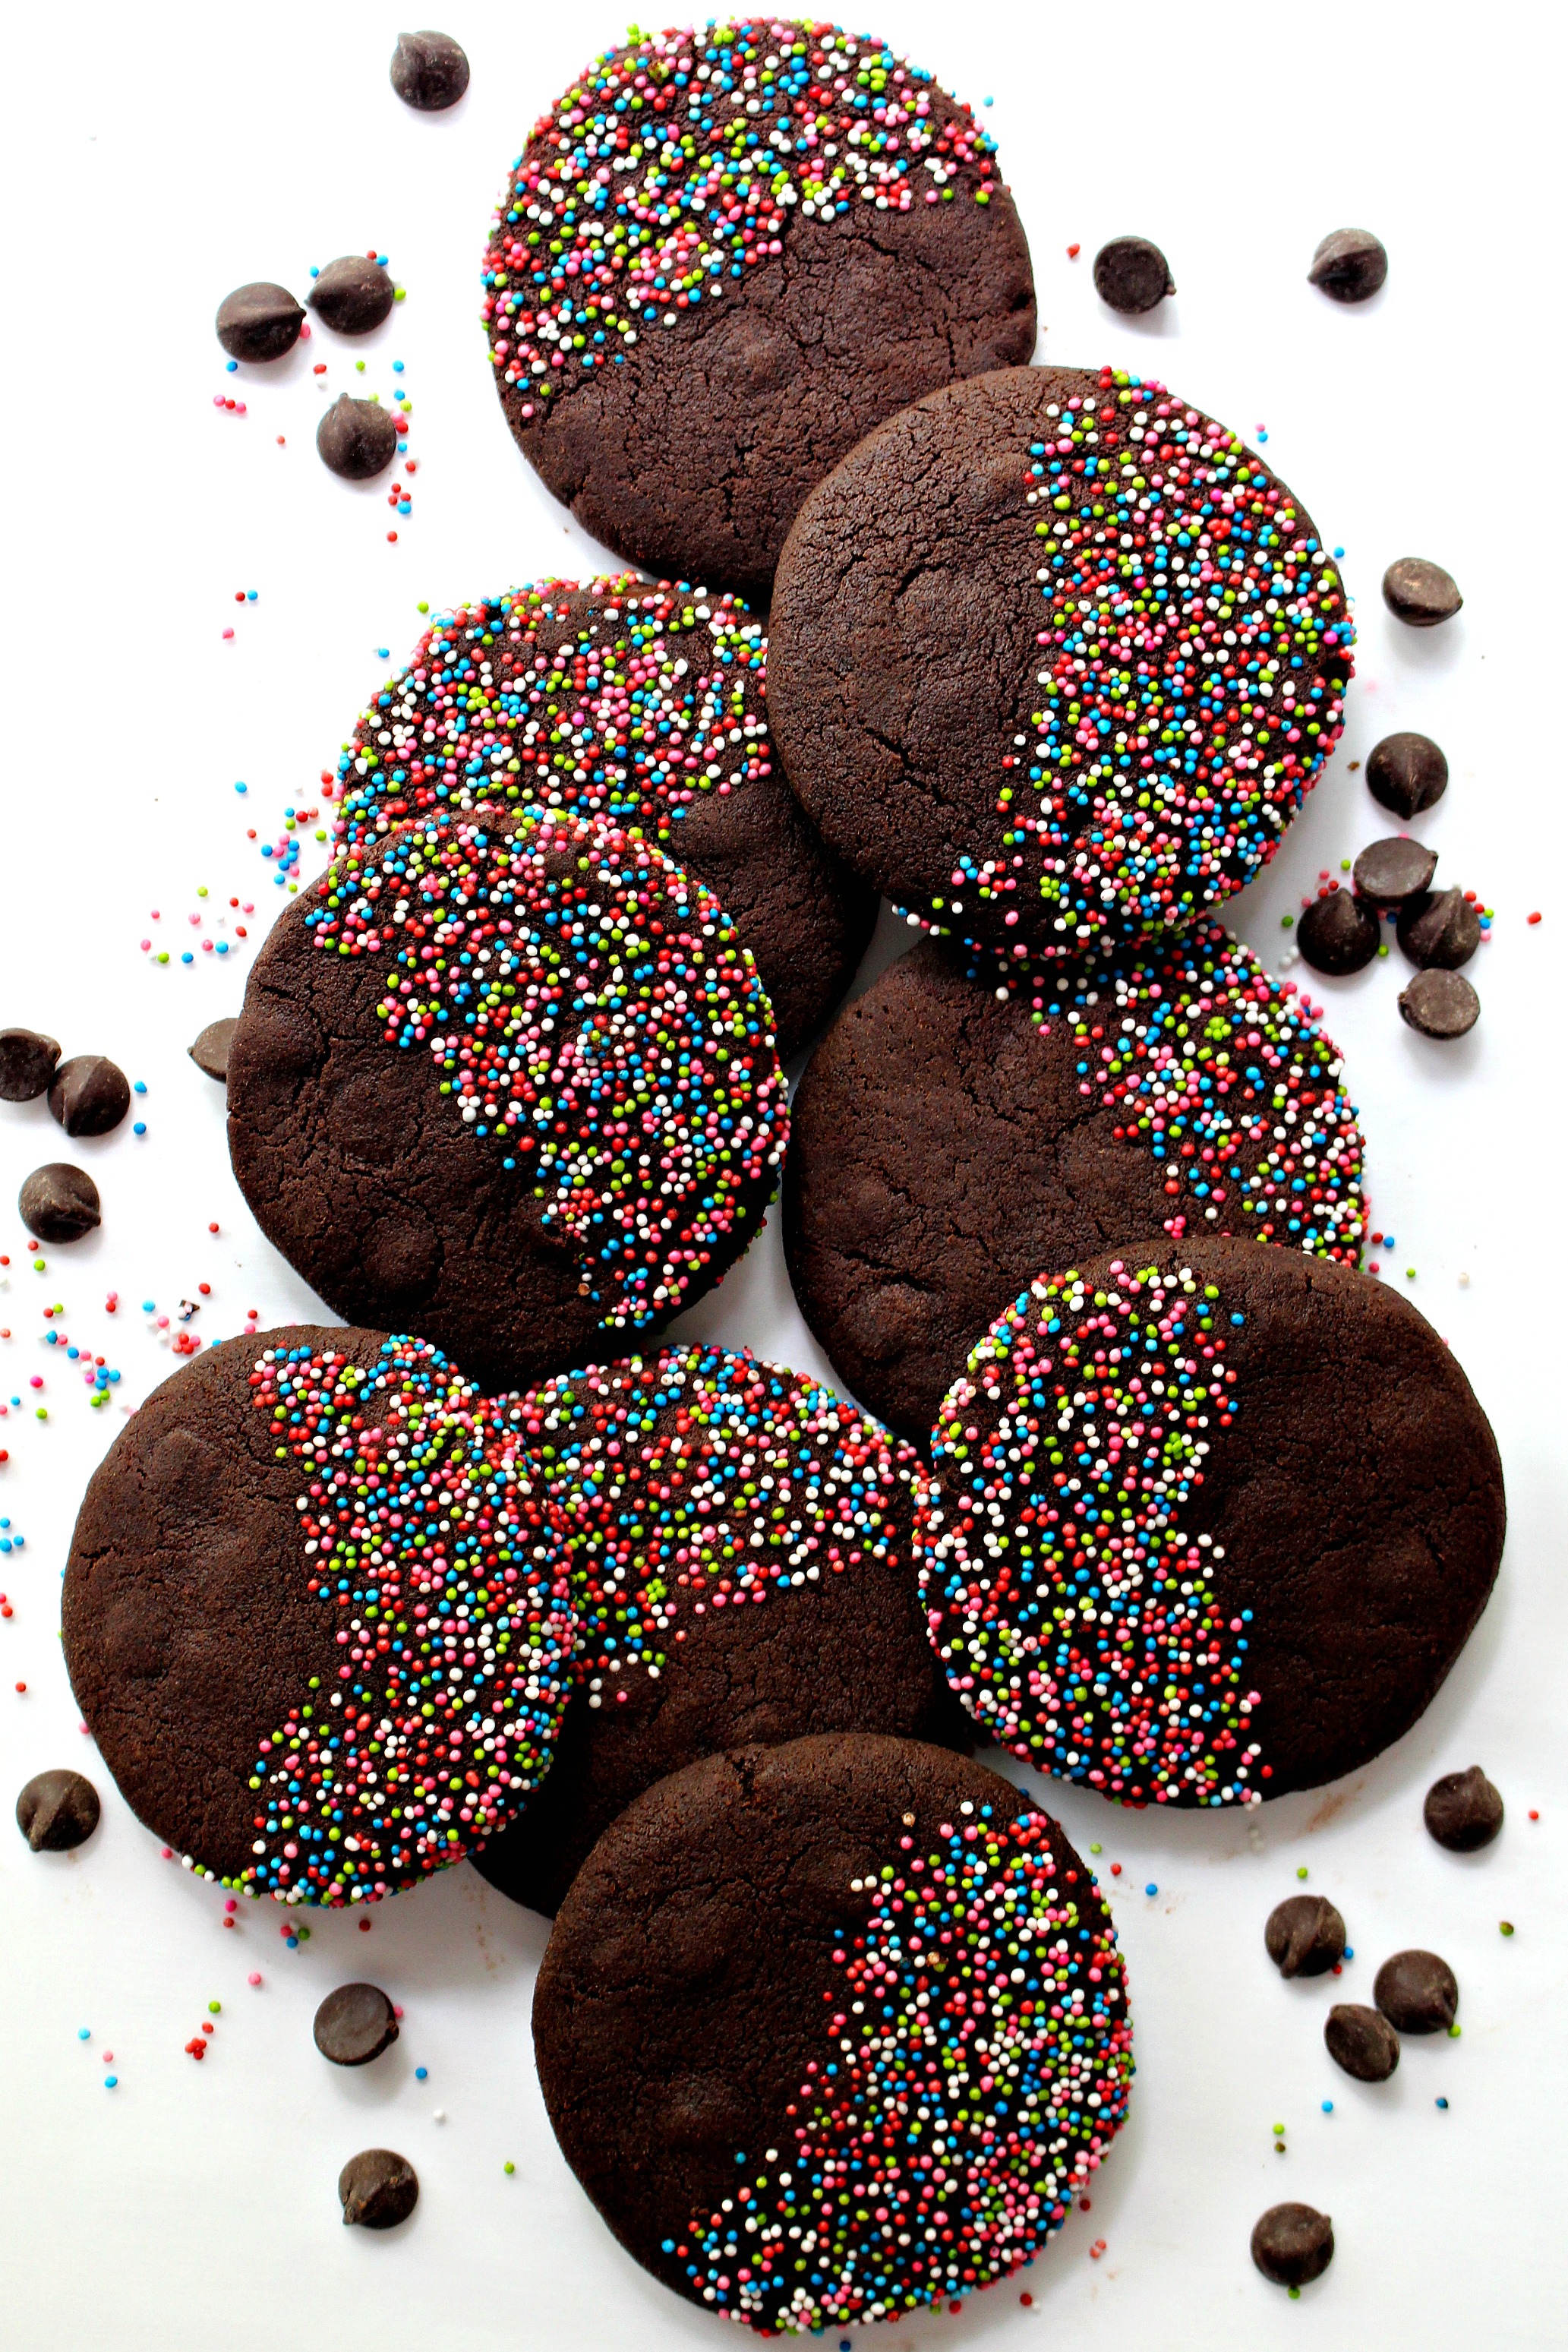 Dark chocolate brown cookies with multicolored nonpareil sprinkles covering half of the cookie top.